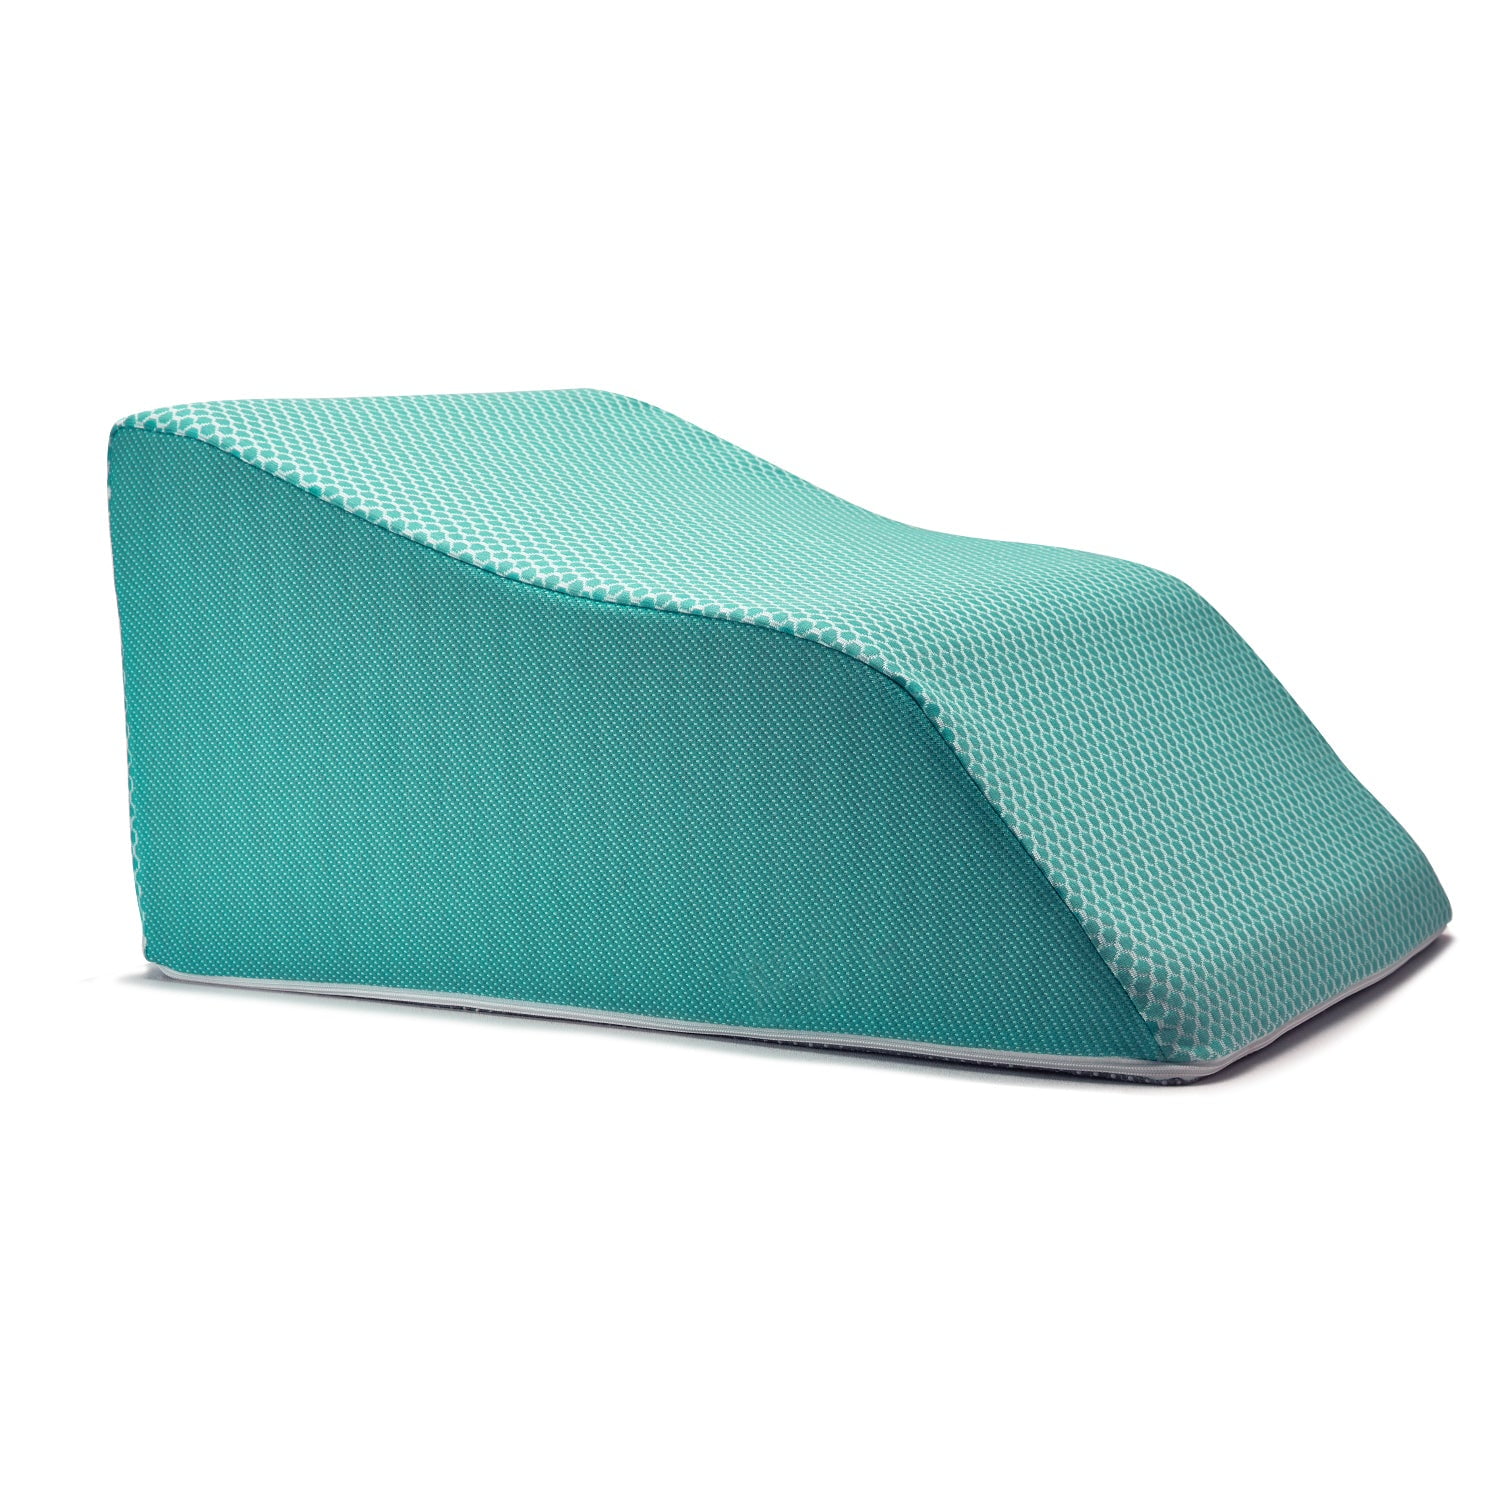 Product Review: Staying elevated with the Lounge Doctor Leg Rest